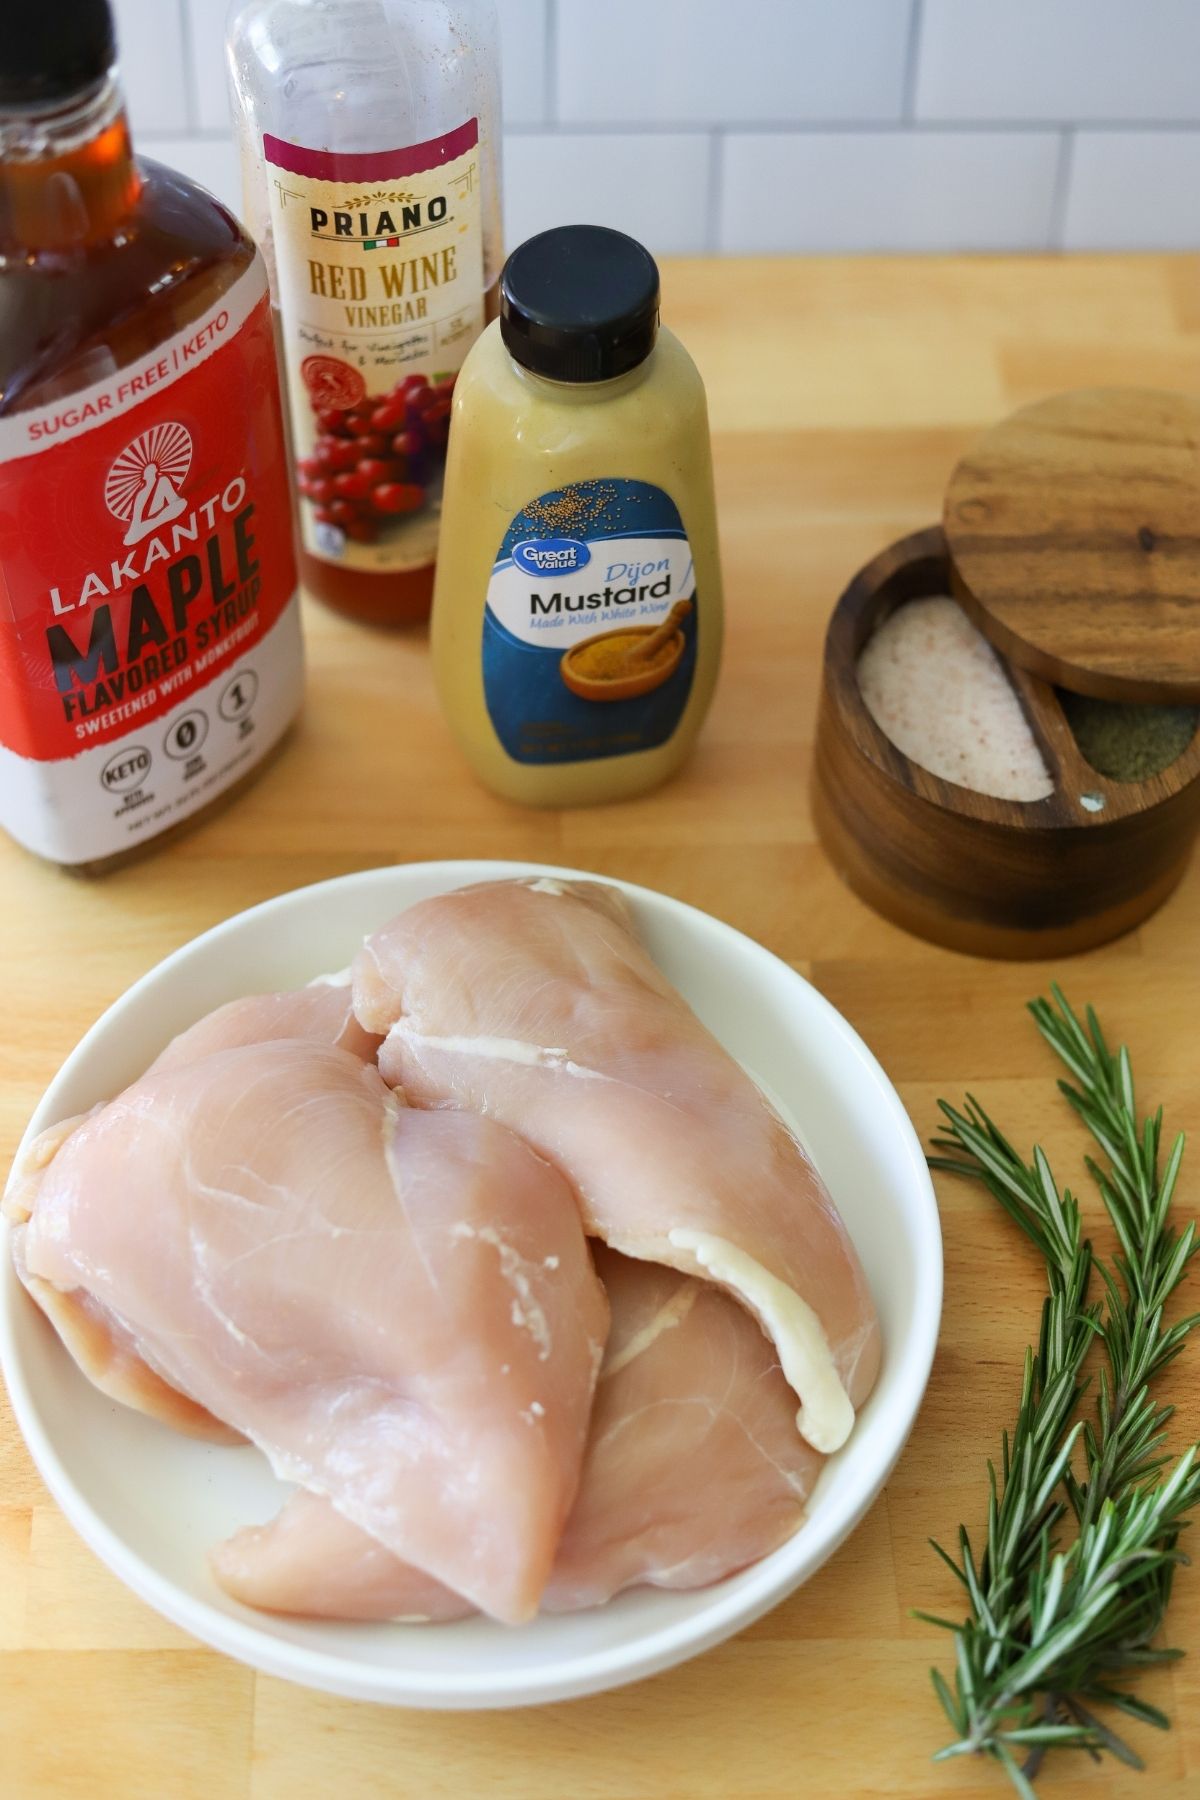 ingredients for maple dijon chicken breasts including chicken breast, sugar free maple syrup, red wine vinegar, dijon mustard, fresh rosemary, and salt and pepper